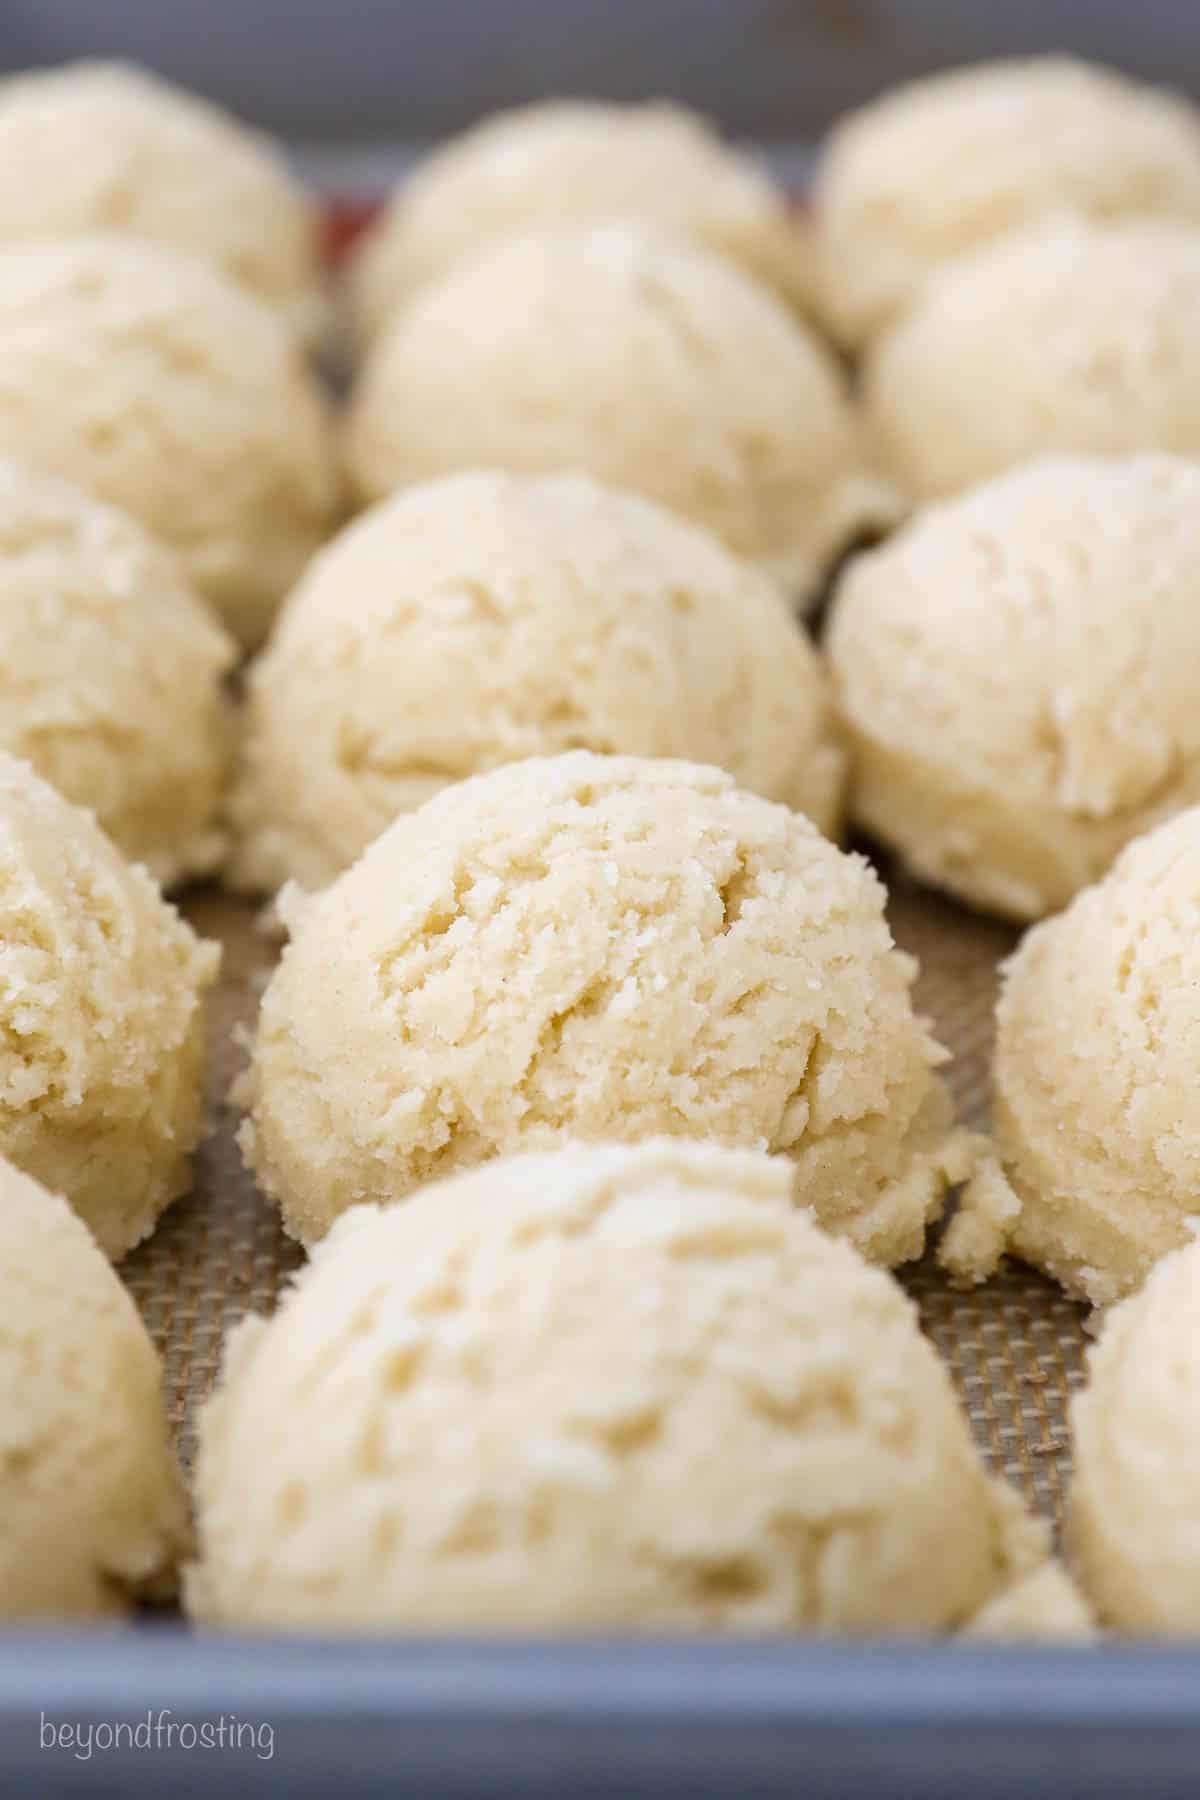 Scoops of sugar cookie dough lined up in rows on a metal baking sheet.